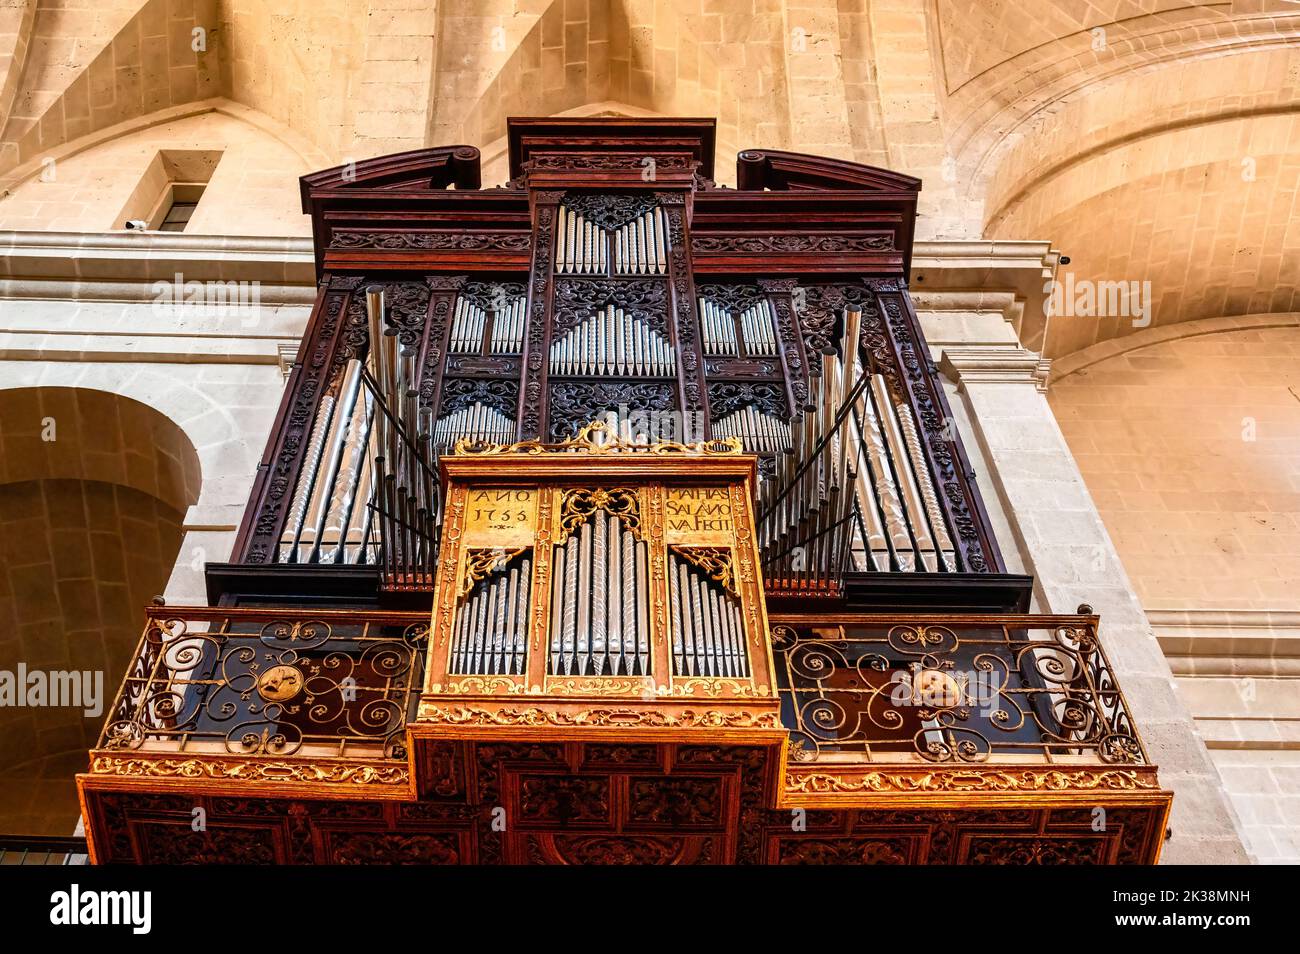 Pipe organ in the interior of the famous medieval building. Low angle view Stock Photo